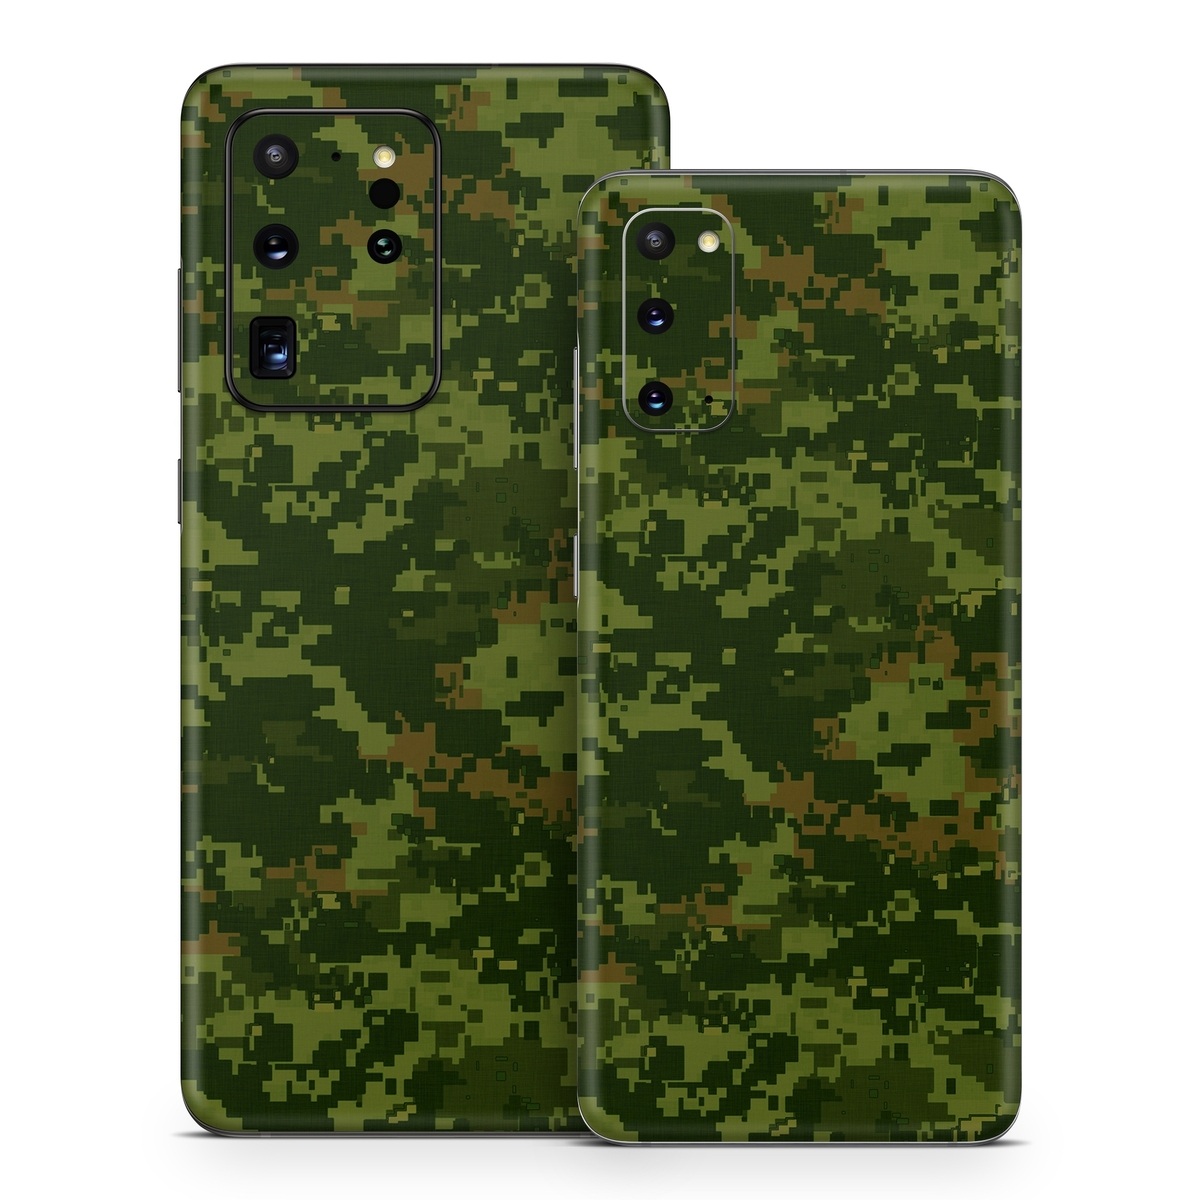  Skin design of Military camouflage, Green, Pattern, Uniform, Camouflage, Clothing, Design, Leaf, Plant, with green, brown colors